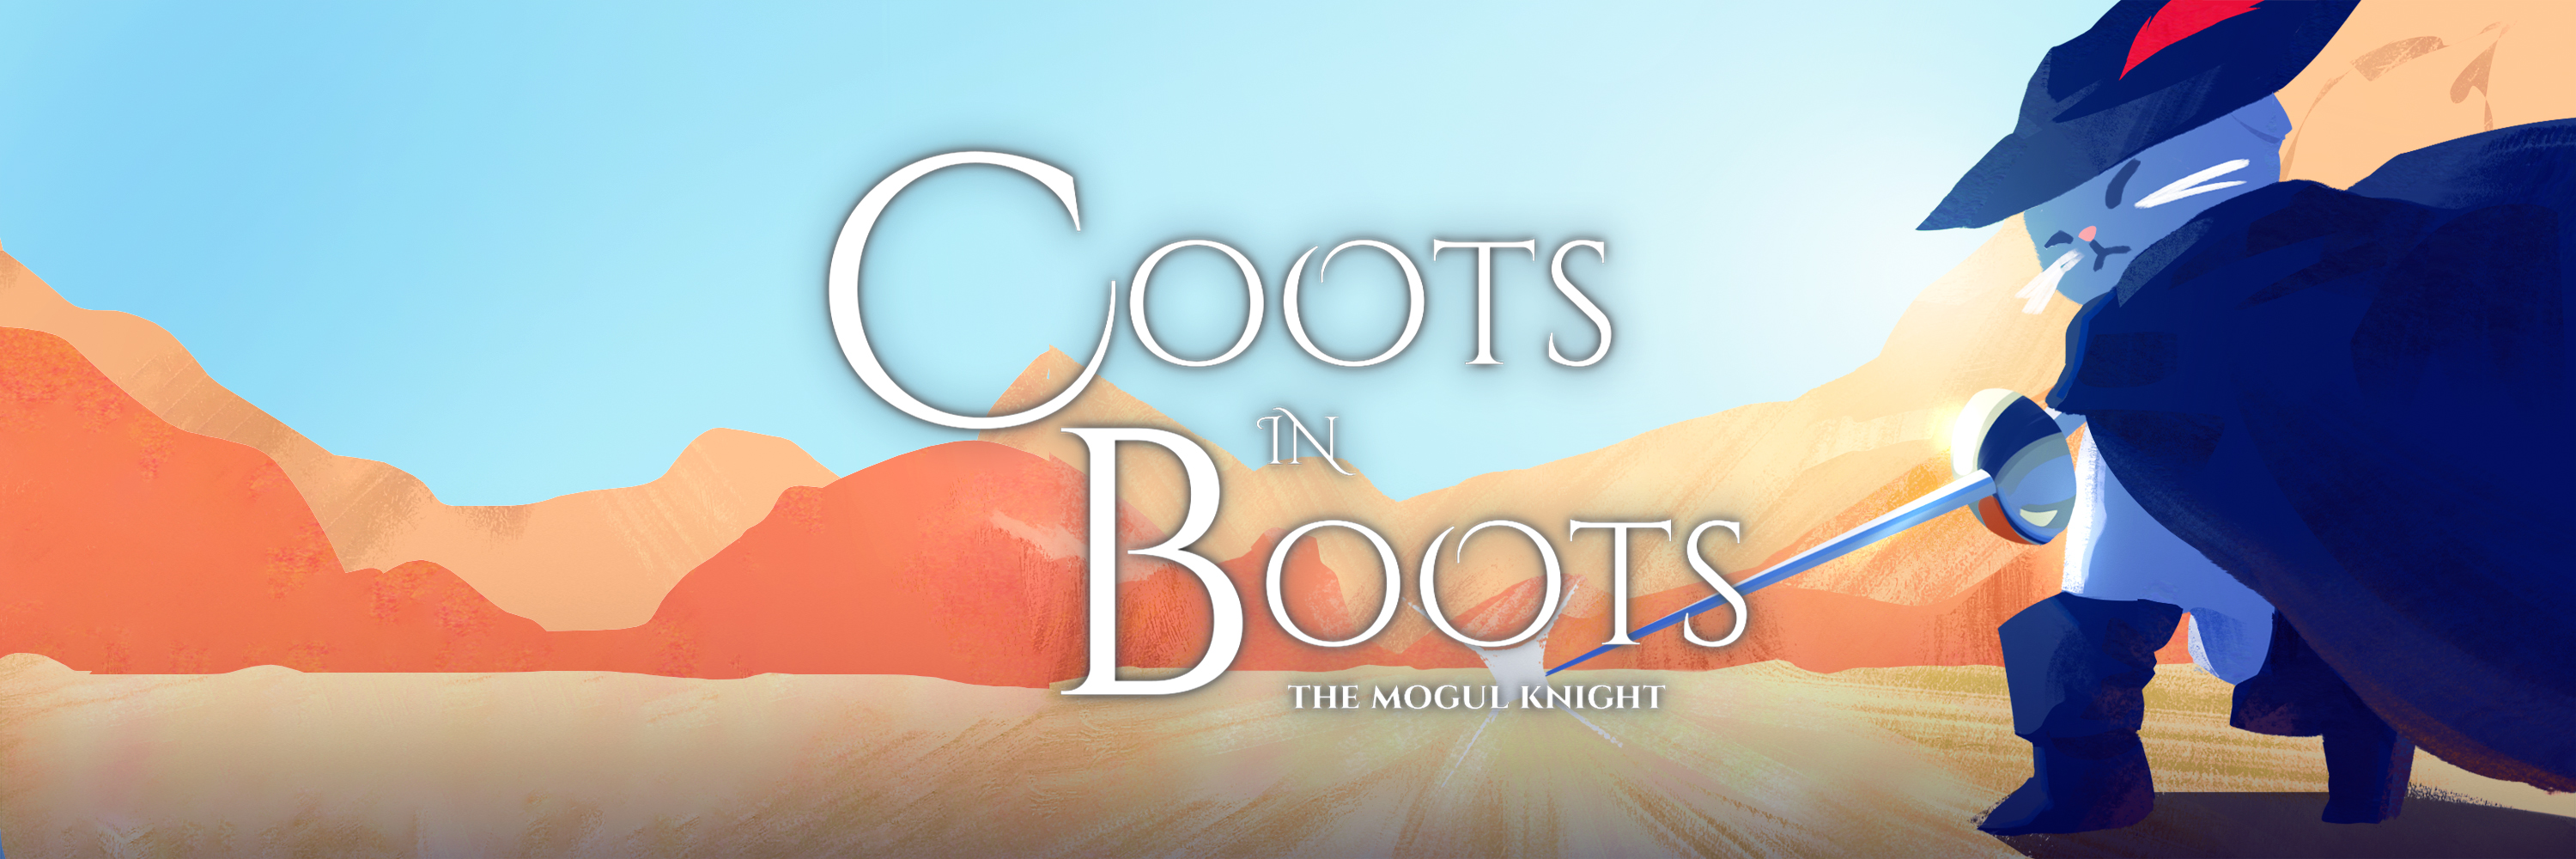 Coots in Boots